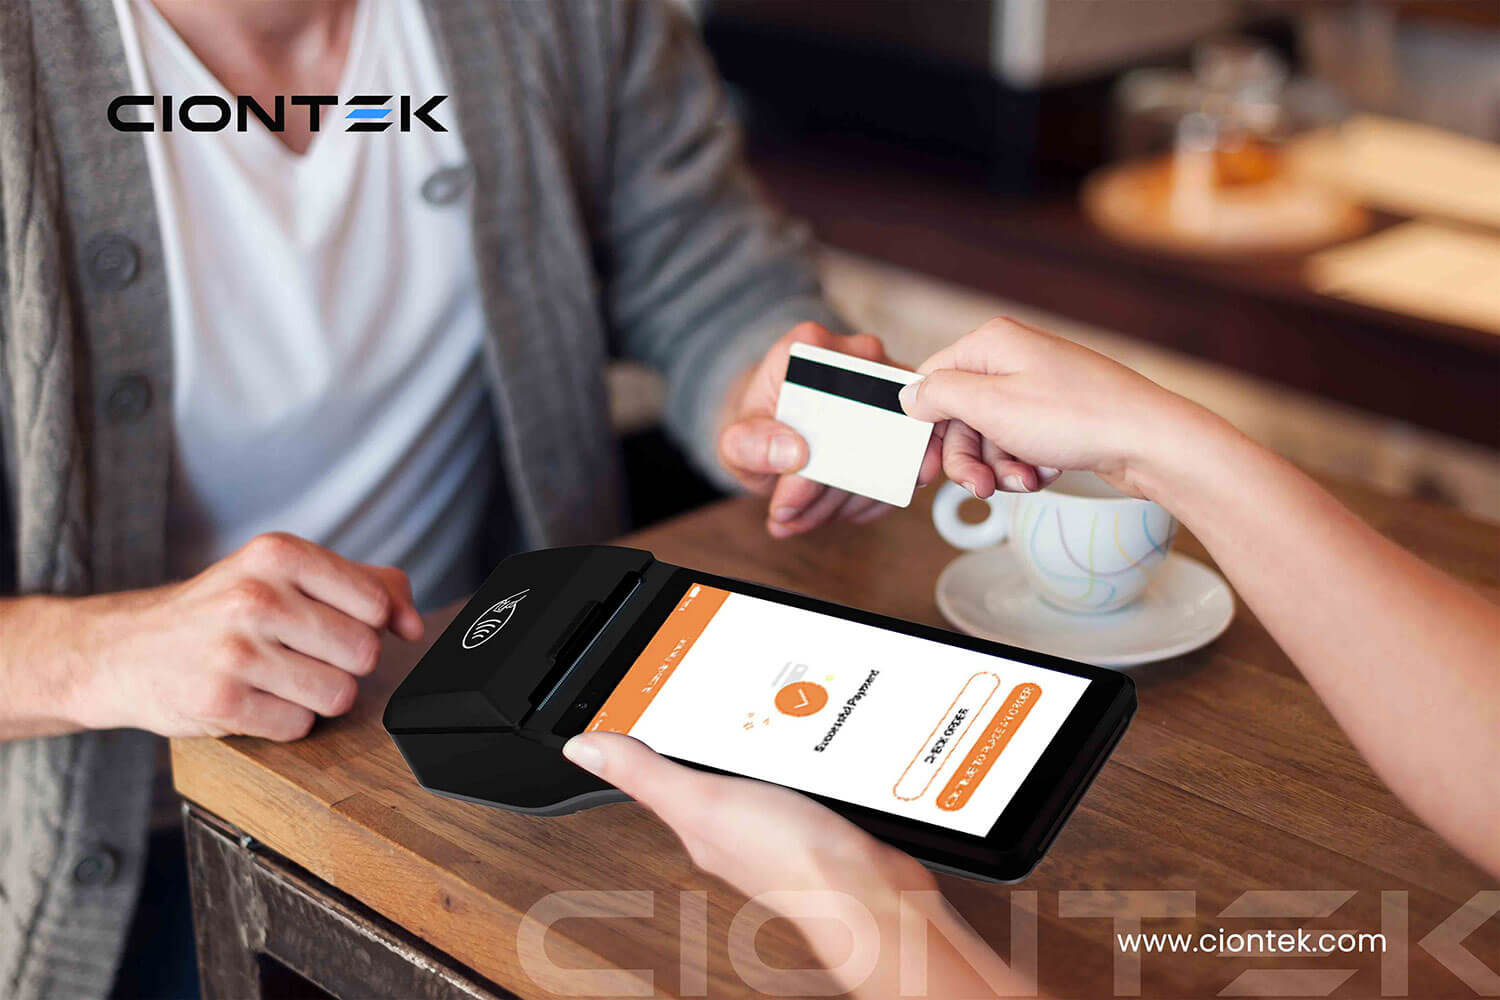  Smart POS Help You Gain More Benefit|Touchless Pay|CIONTEK